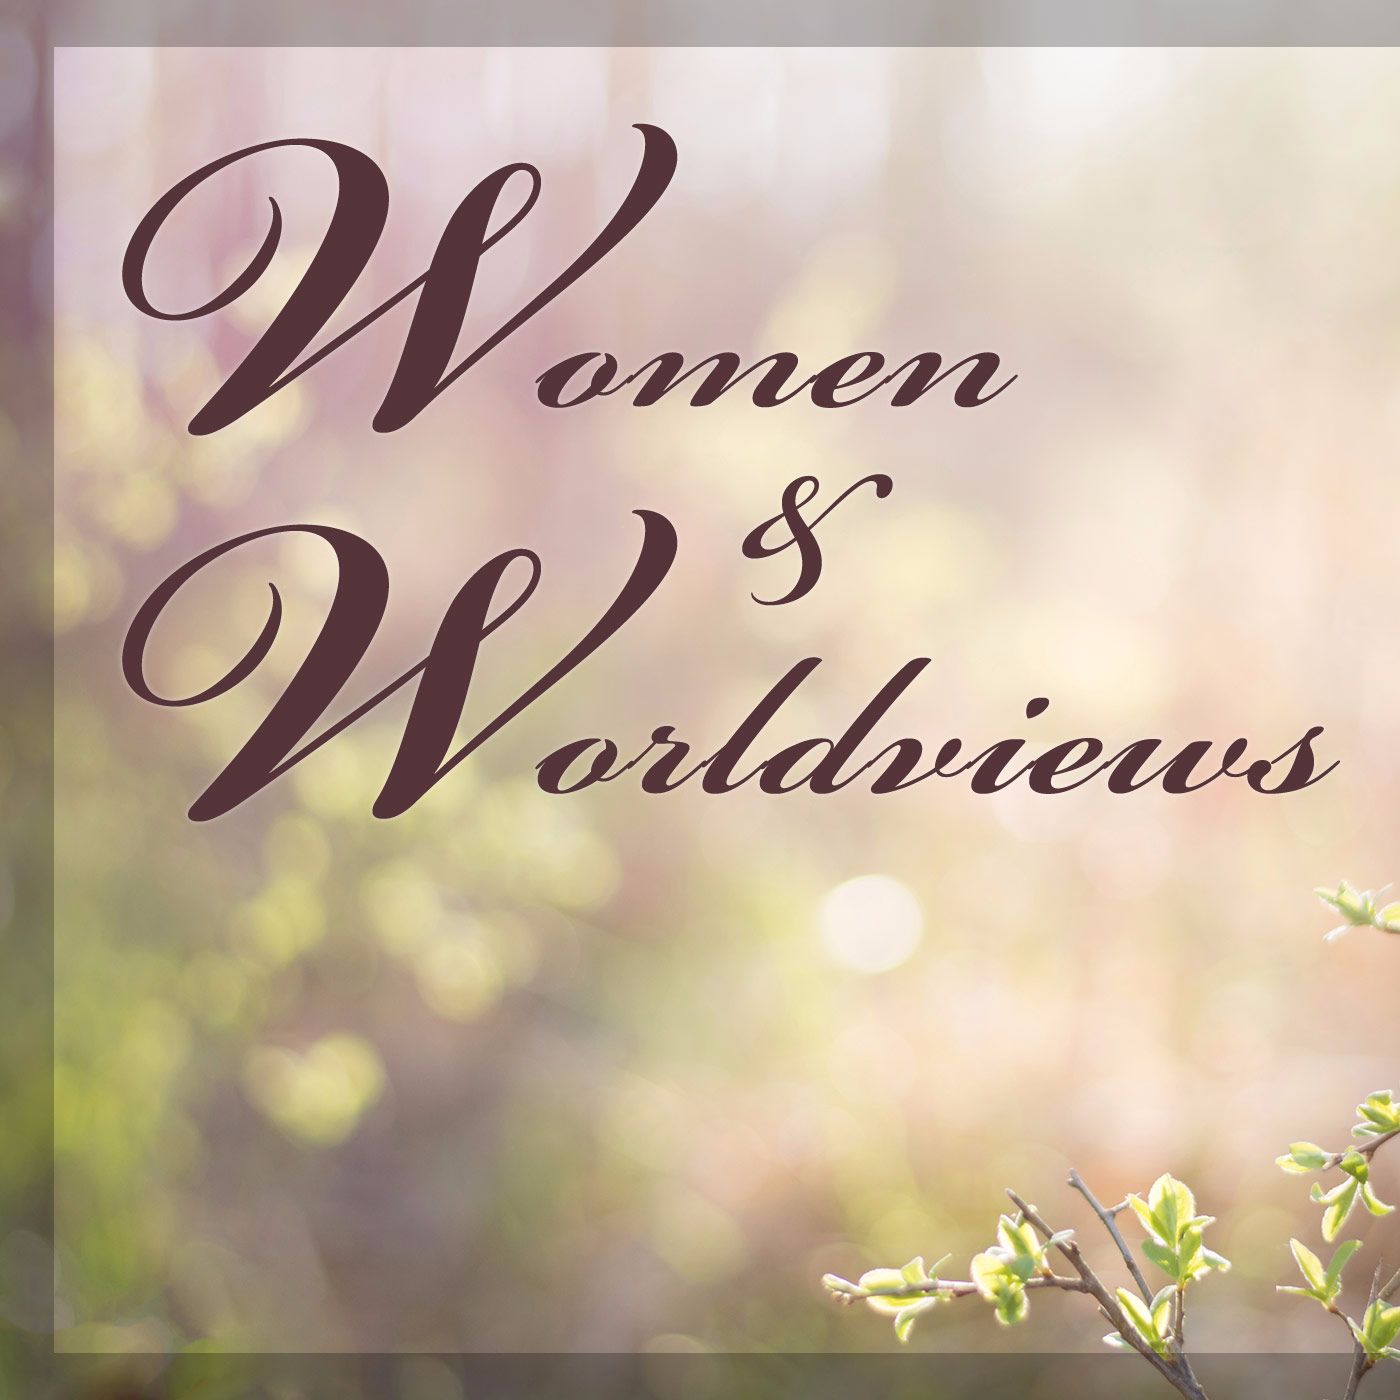 Women and Worldviews Podcast